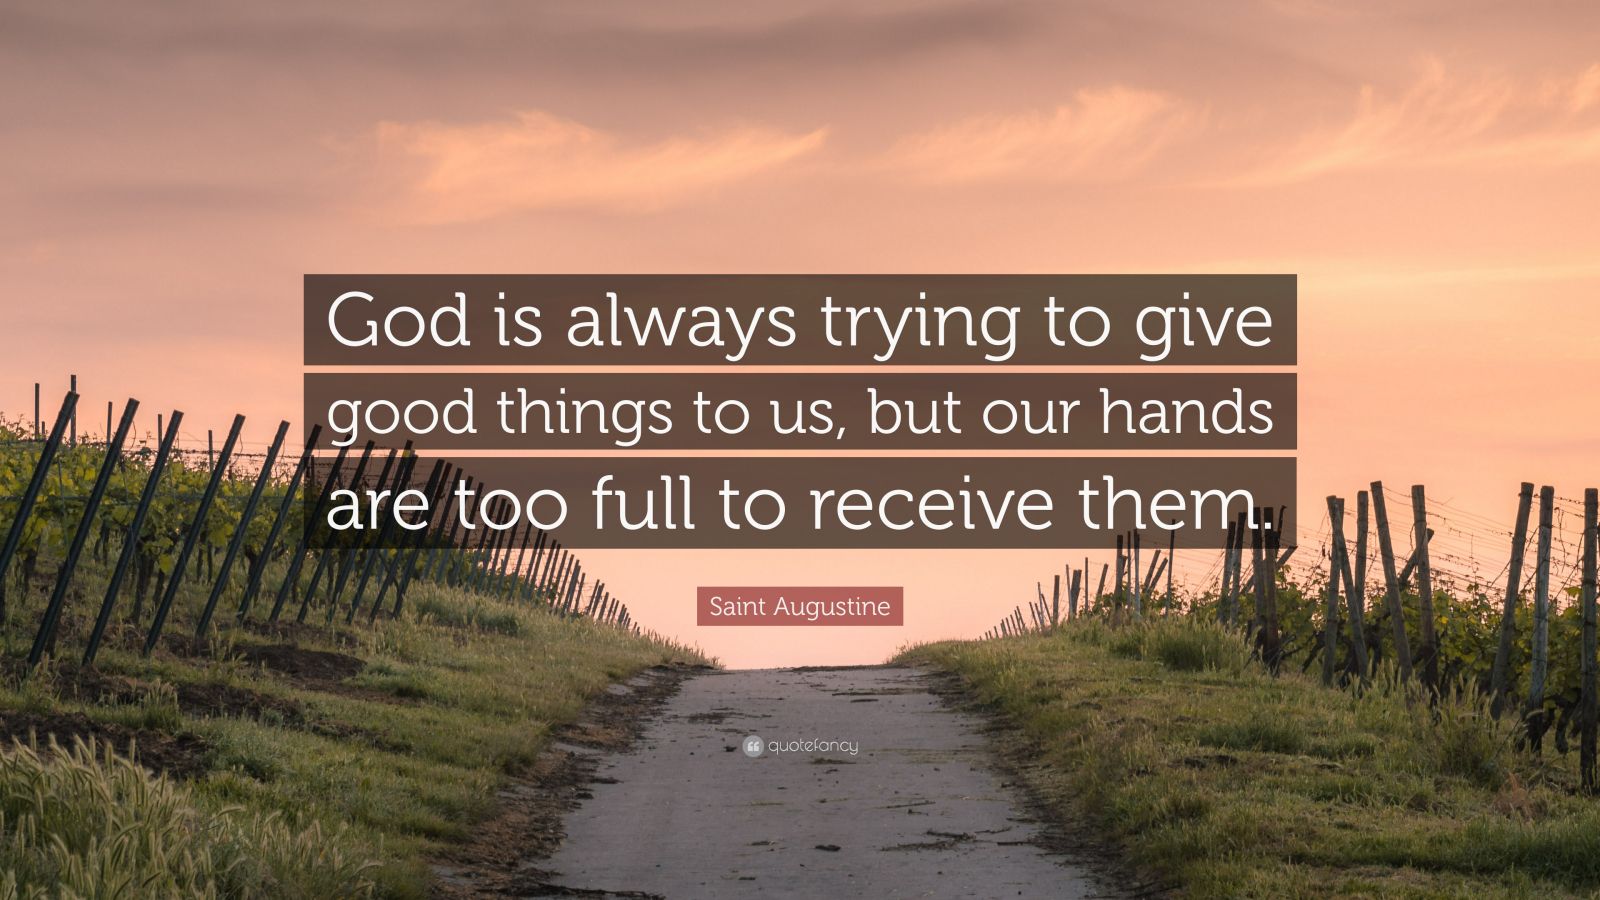 Saint Augustine Quote: “God is always trying to give good things to us